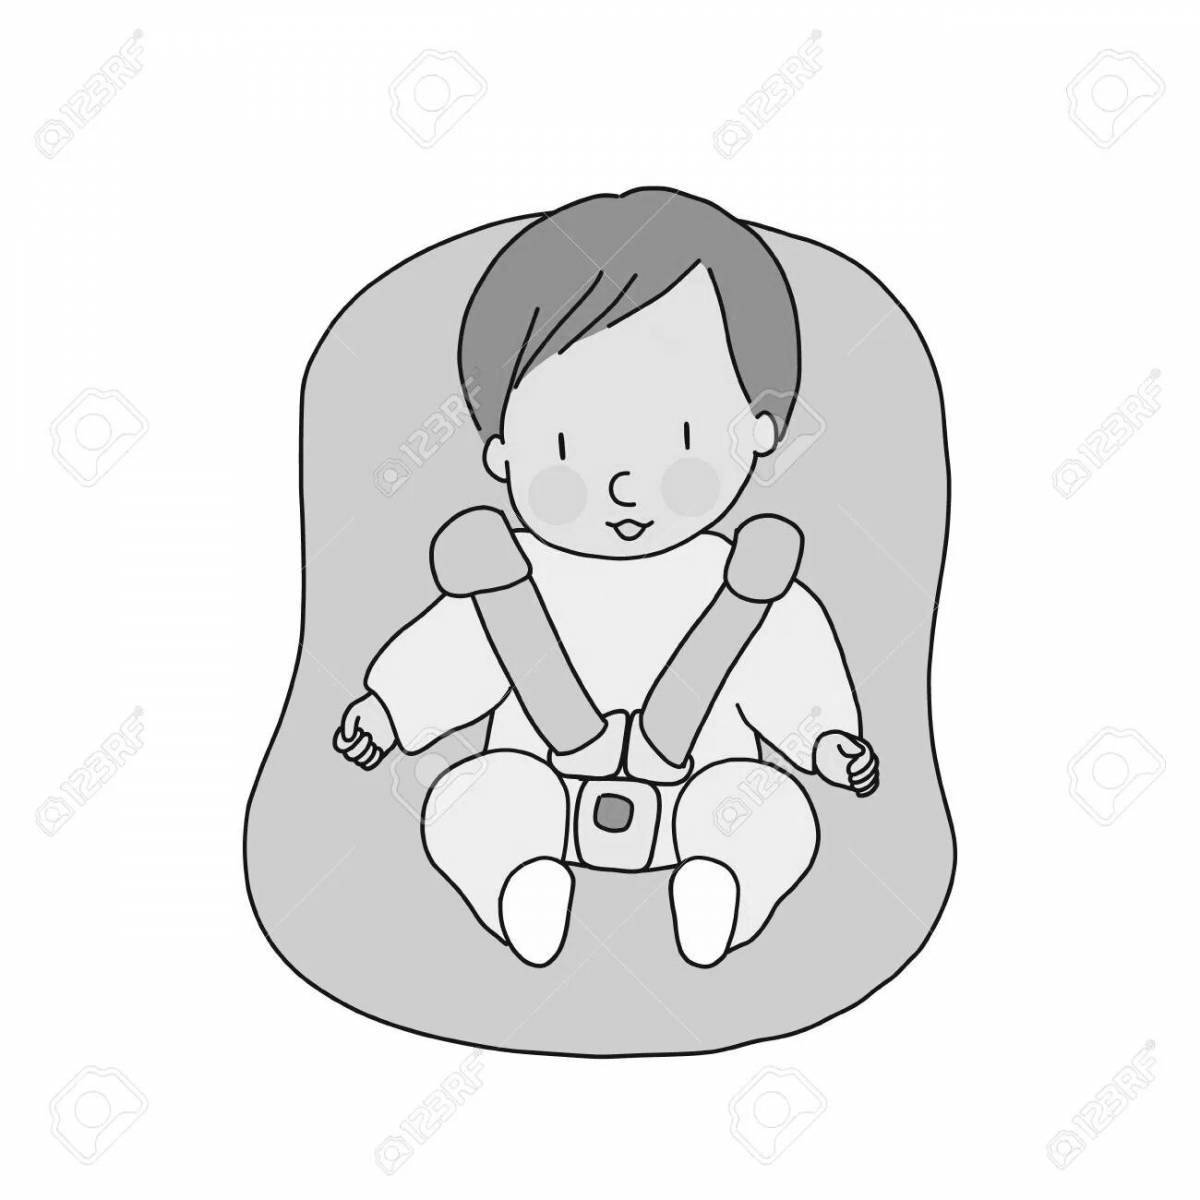 Playful car seat coloring page for kids